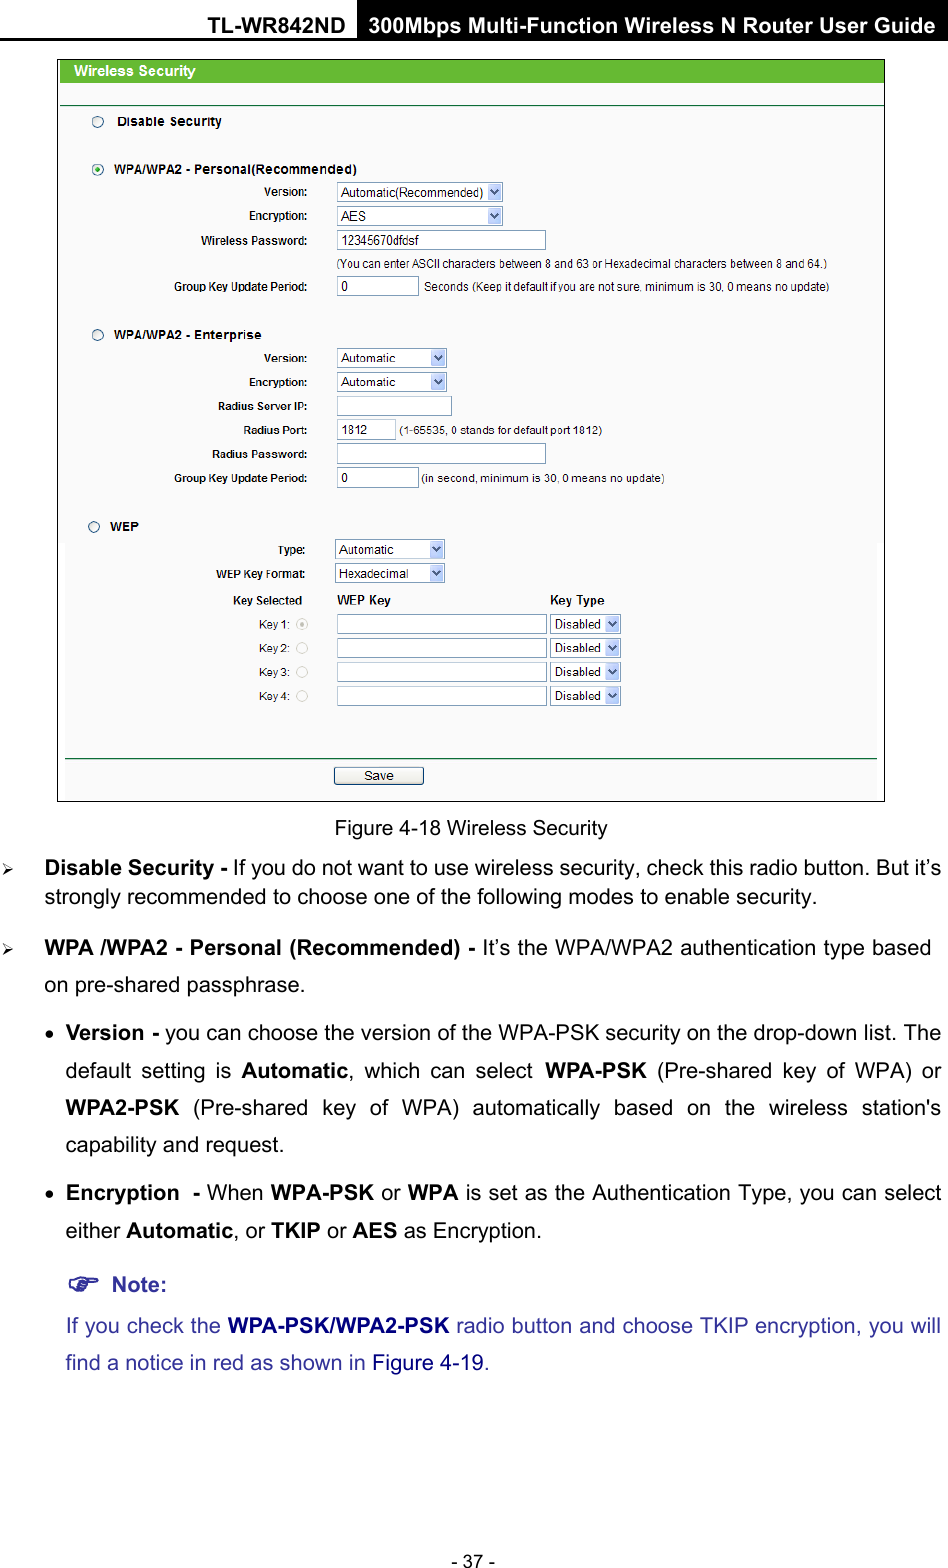 TL-WR842ND 300Mbps Multi-Function Wireless N Router User Guide  - 37 -  Figure 4-18 Wireless Security  Disable Security - If you do not want to use wireless security, check this radio button. But it’s strongly recommended to choose one of the following modes to enable security.  WPA /WPA2 - Personal (Recommended) - It’s the WPA/WPA2 authentication type based on pre-shared passphrase.   • Version - you can choose the version of the WPA-PSK security on the drop-down list. The default setting is Automatic, which can select WPA-PSK  (Pre-shared key of WPA)  or WPA2-PSK  (Pre-shared key of WPA)  automatically based on the wireless station&apos;s capability and request. • Encryption - When WPA-PSK or WPA is set as the Authentication Type, you can select either Automatic, or TKIP or AES as Encryption.  Note:   If you check the WPA-PSK/WPA2-PSK radio button and choose TKIP encryption, you will find a notice in red as shown in Figure 4-19. 